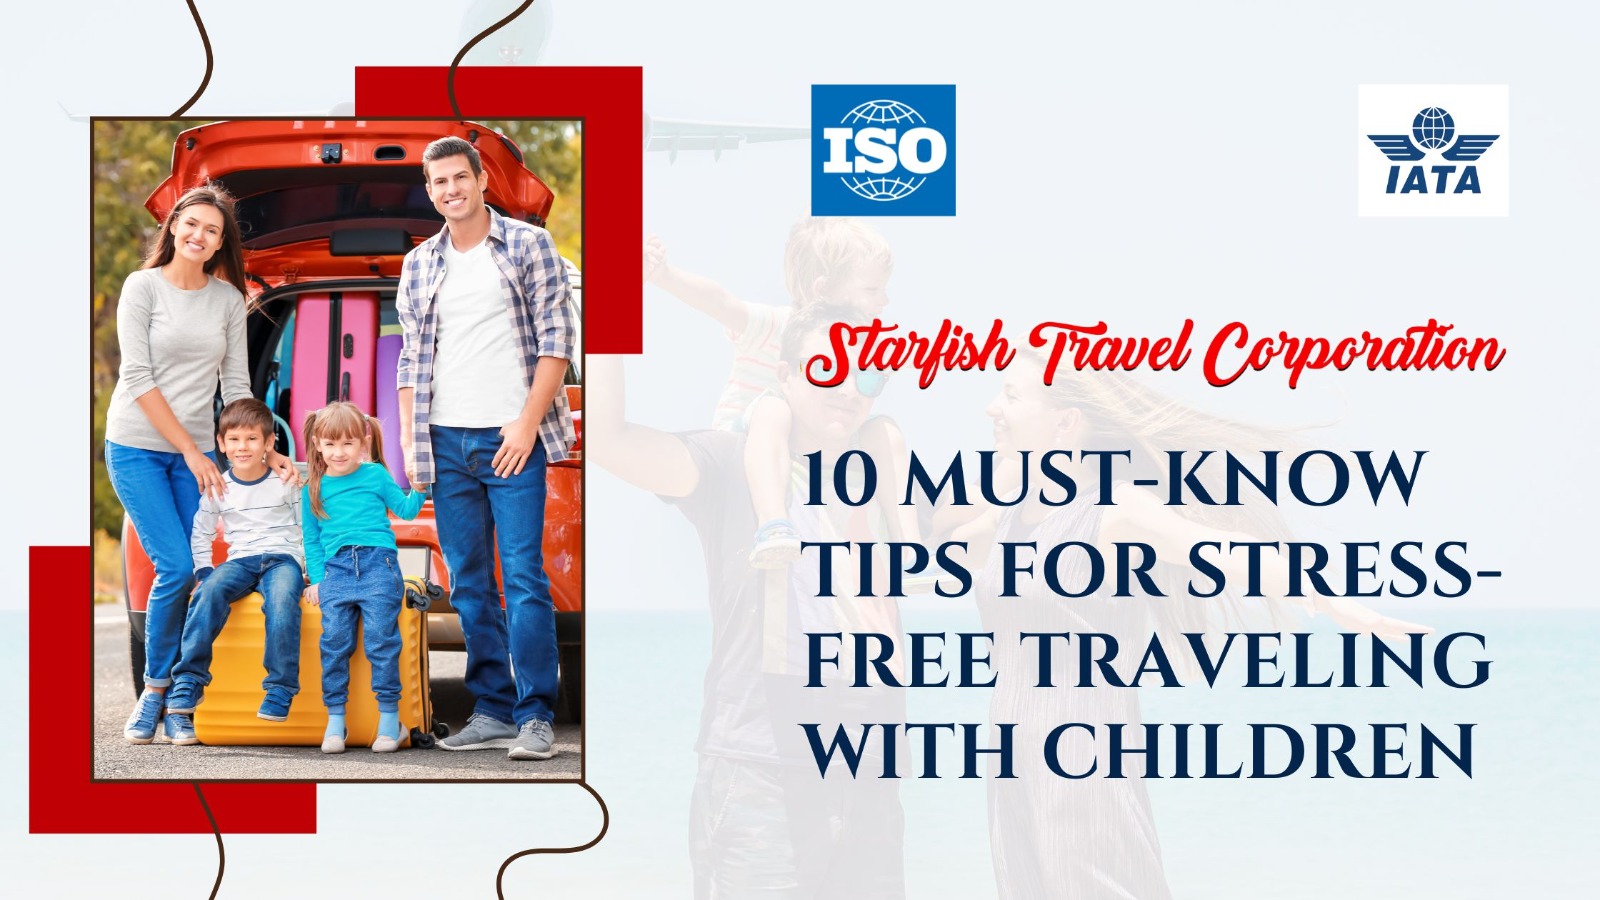 10 Must-Know Tips for Stress-Free Traveling with Children